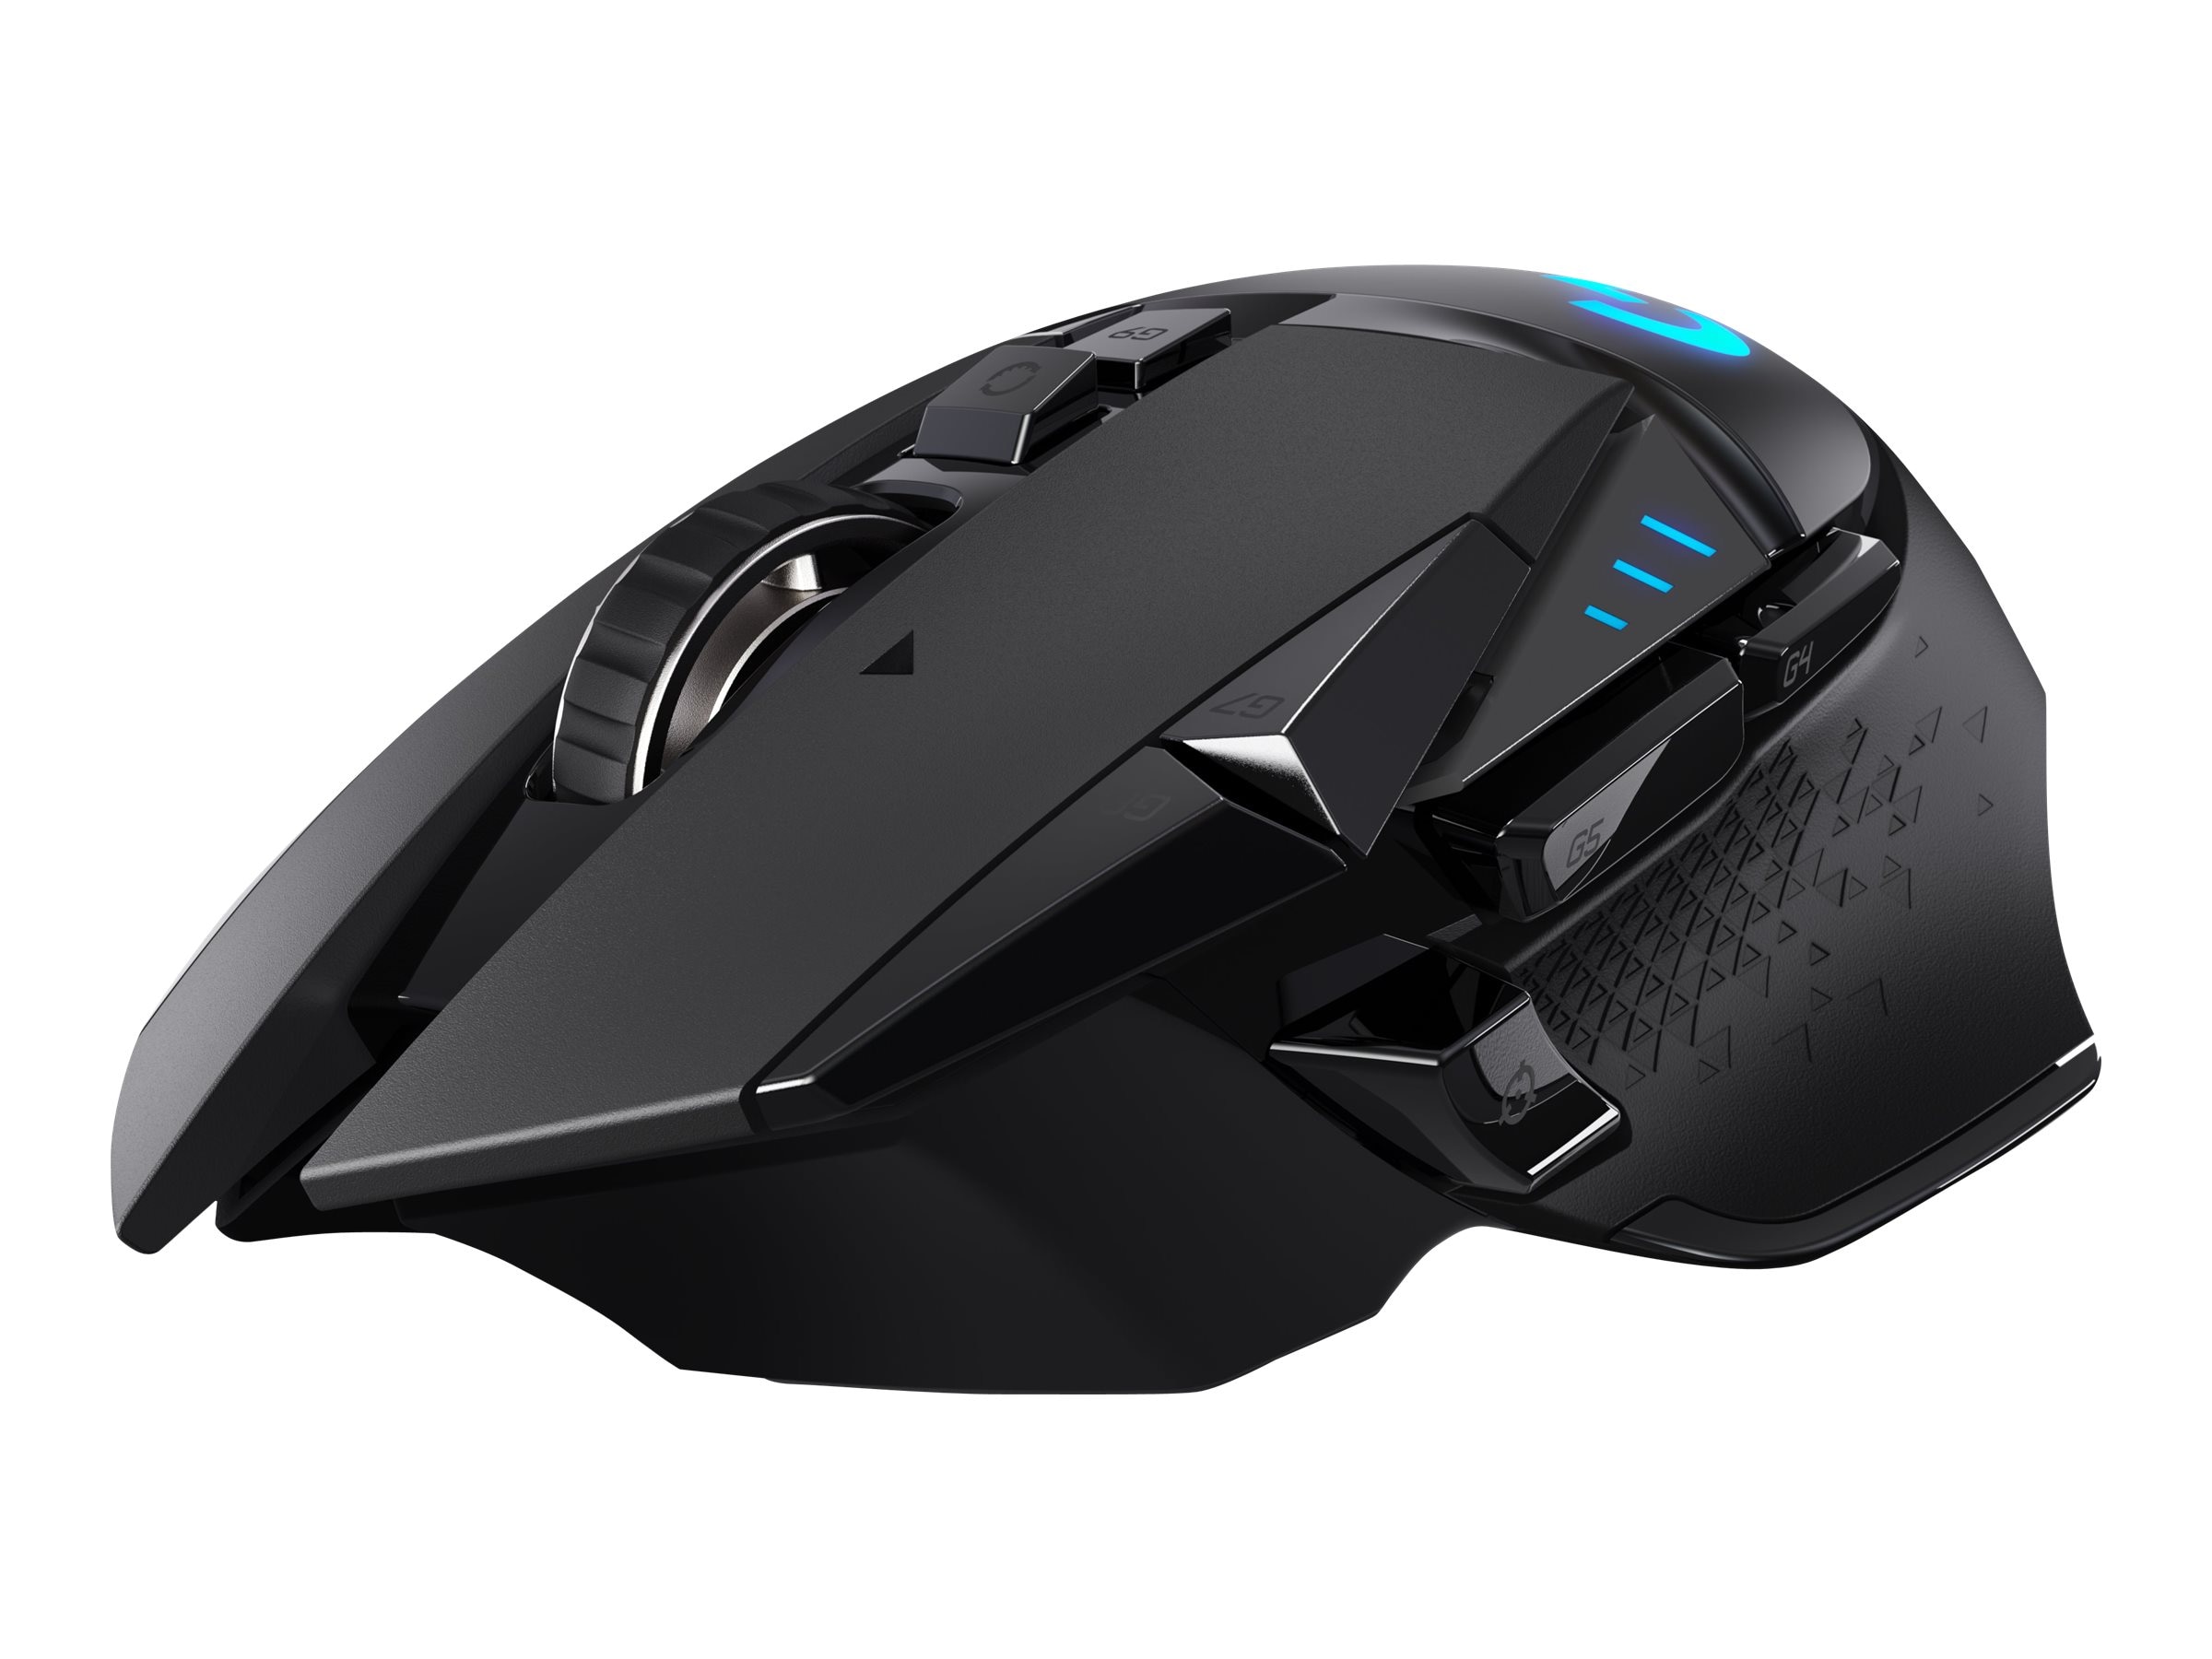 Lightspeed Optical Gaming Mouse with RGB (910-005565)